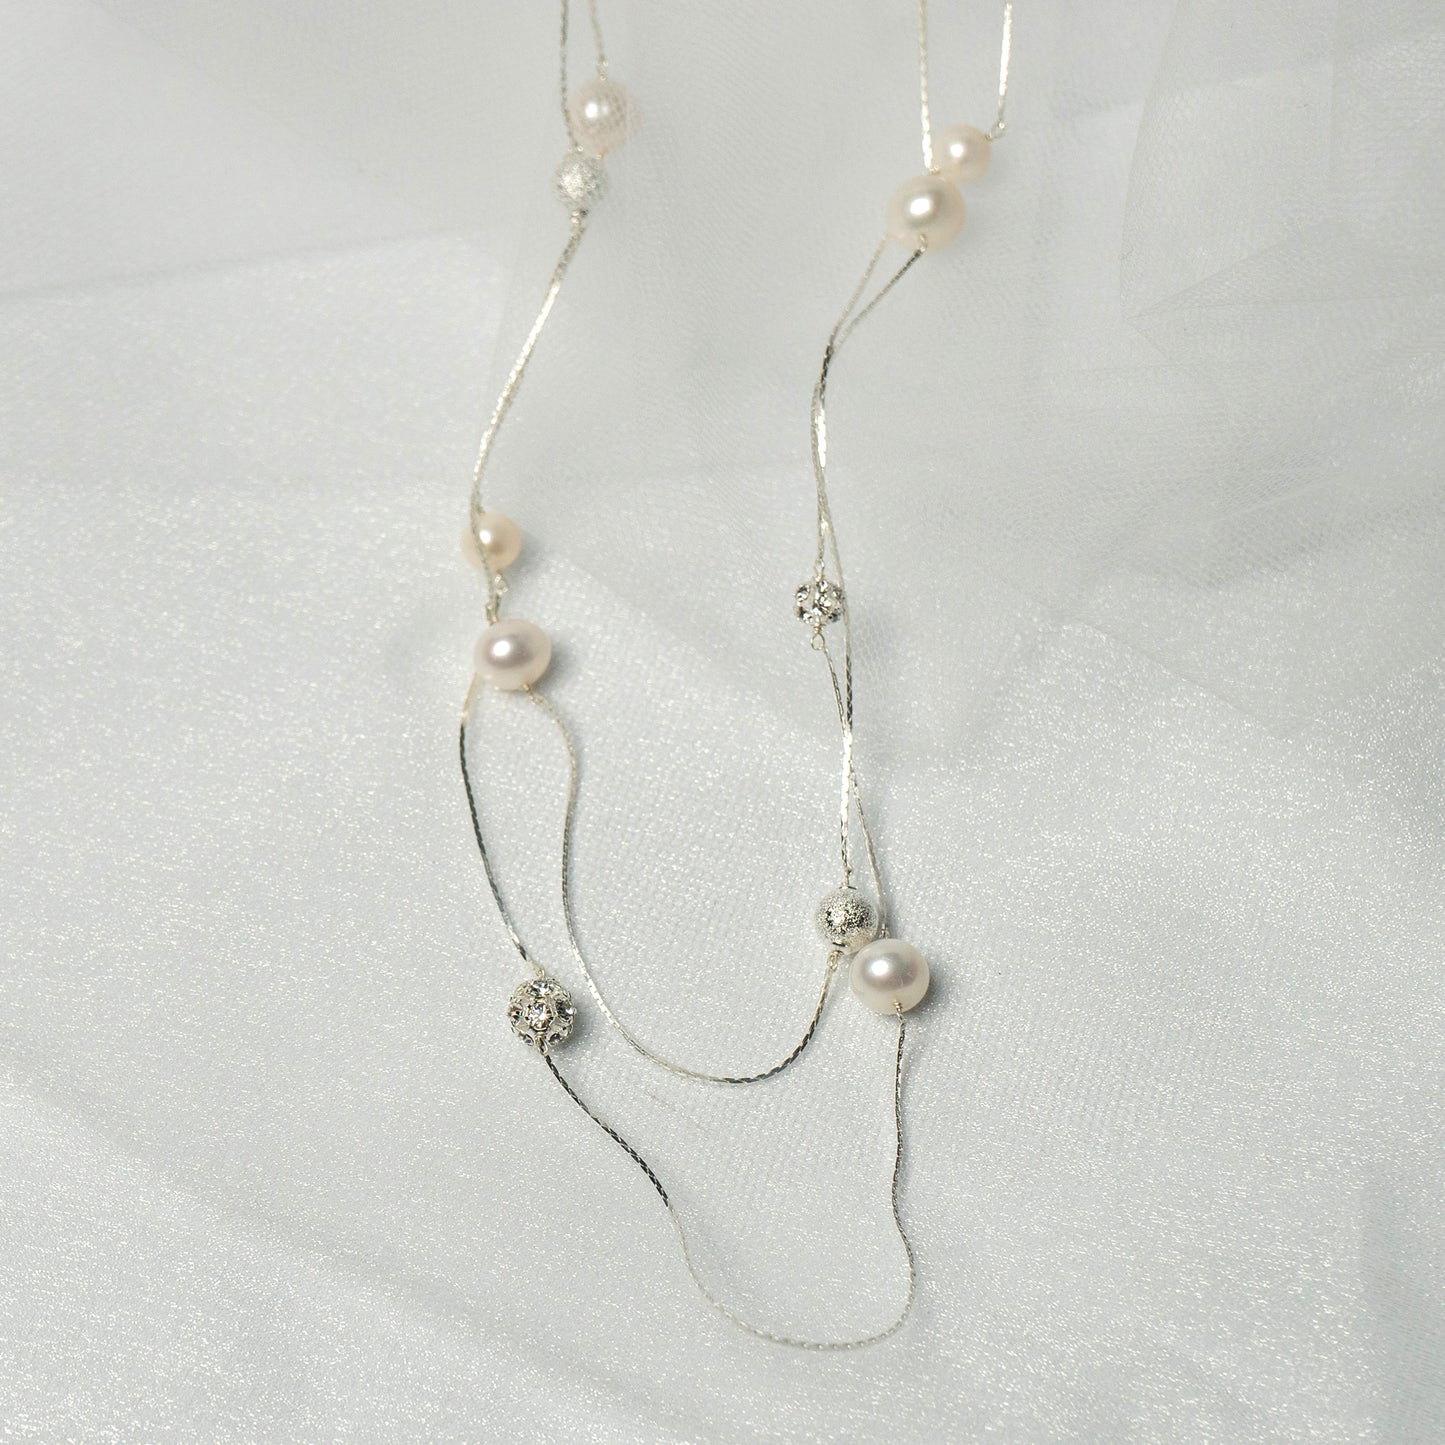 Freshwater pearl twin station necklace